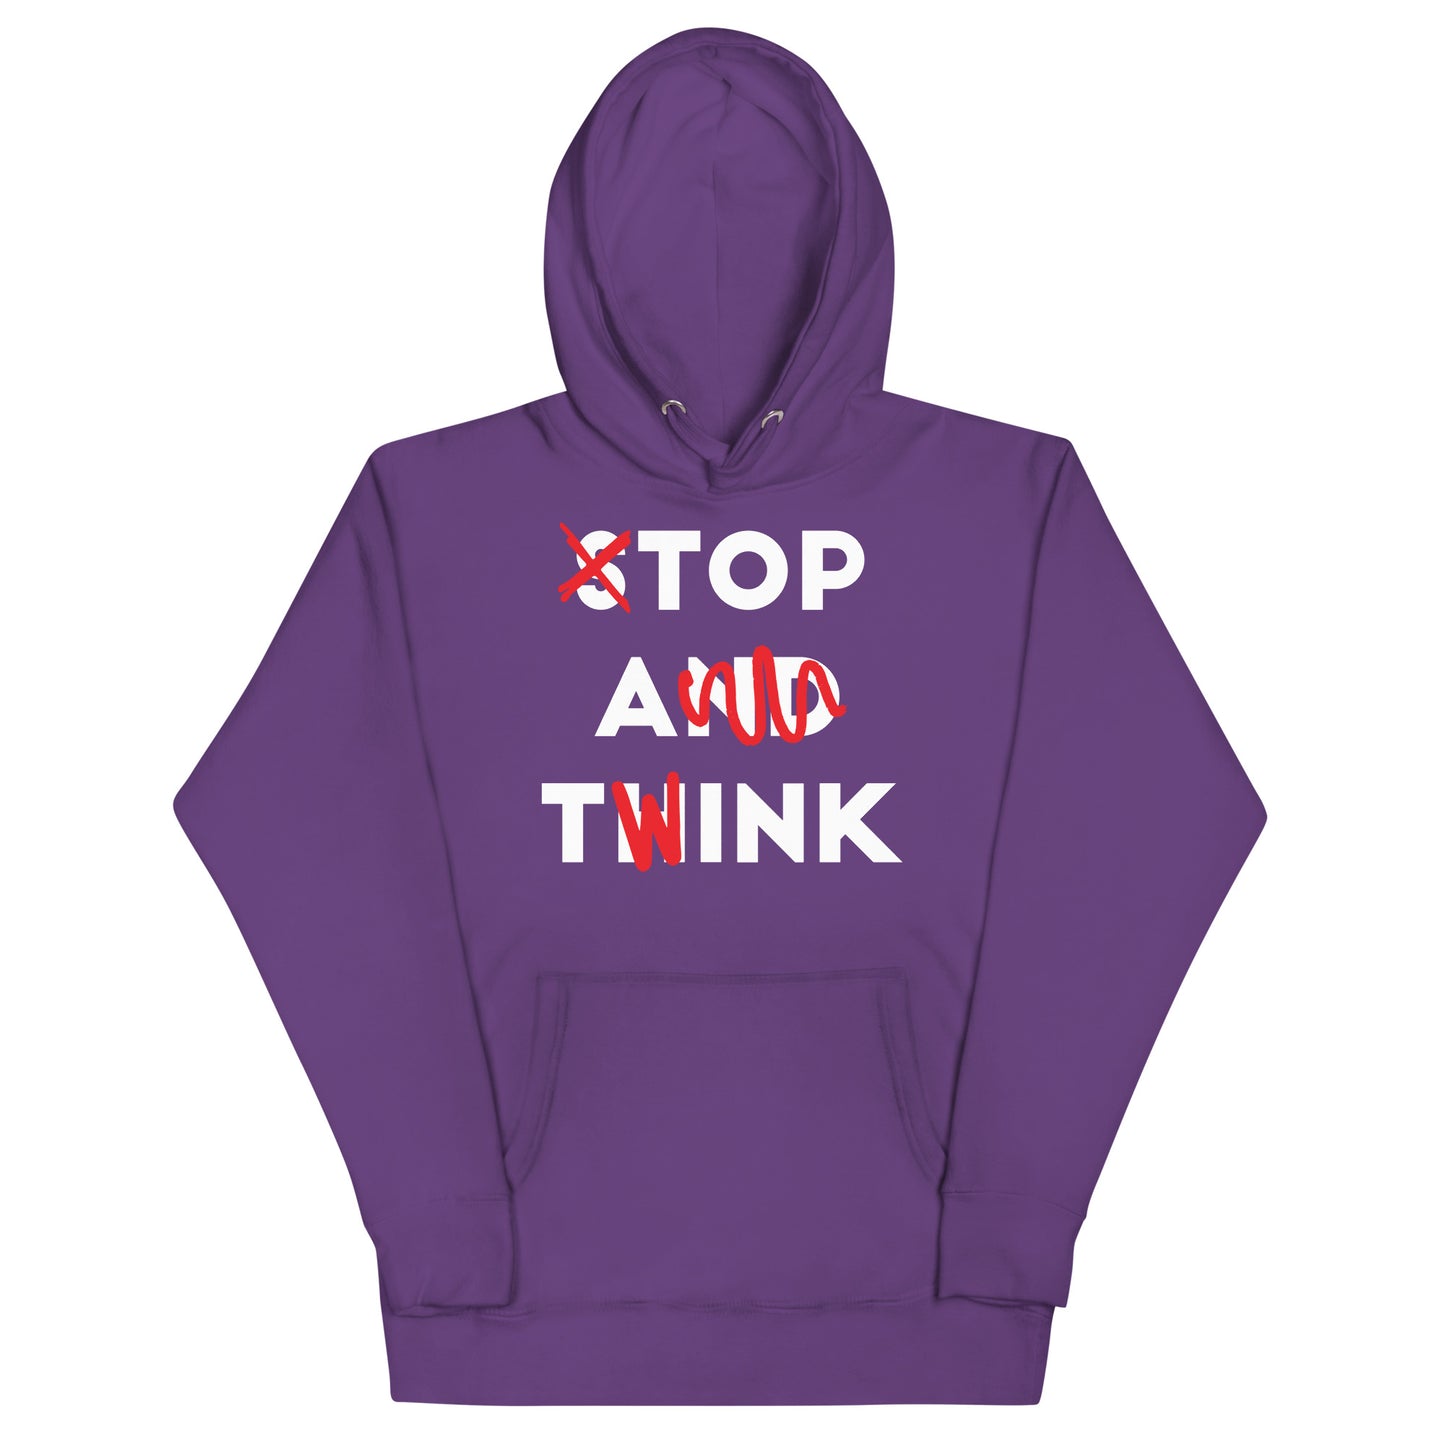 Top a Twink (Stop And Think) Unisex Hoodie